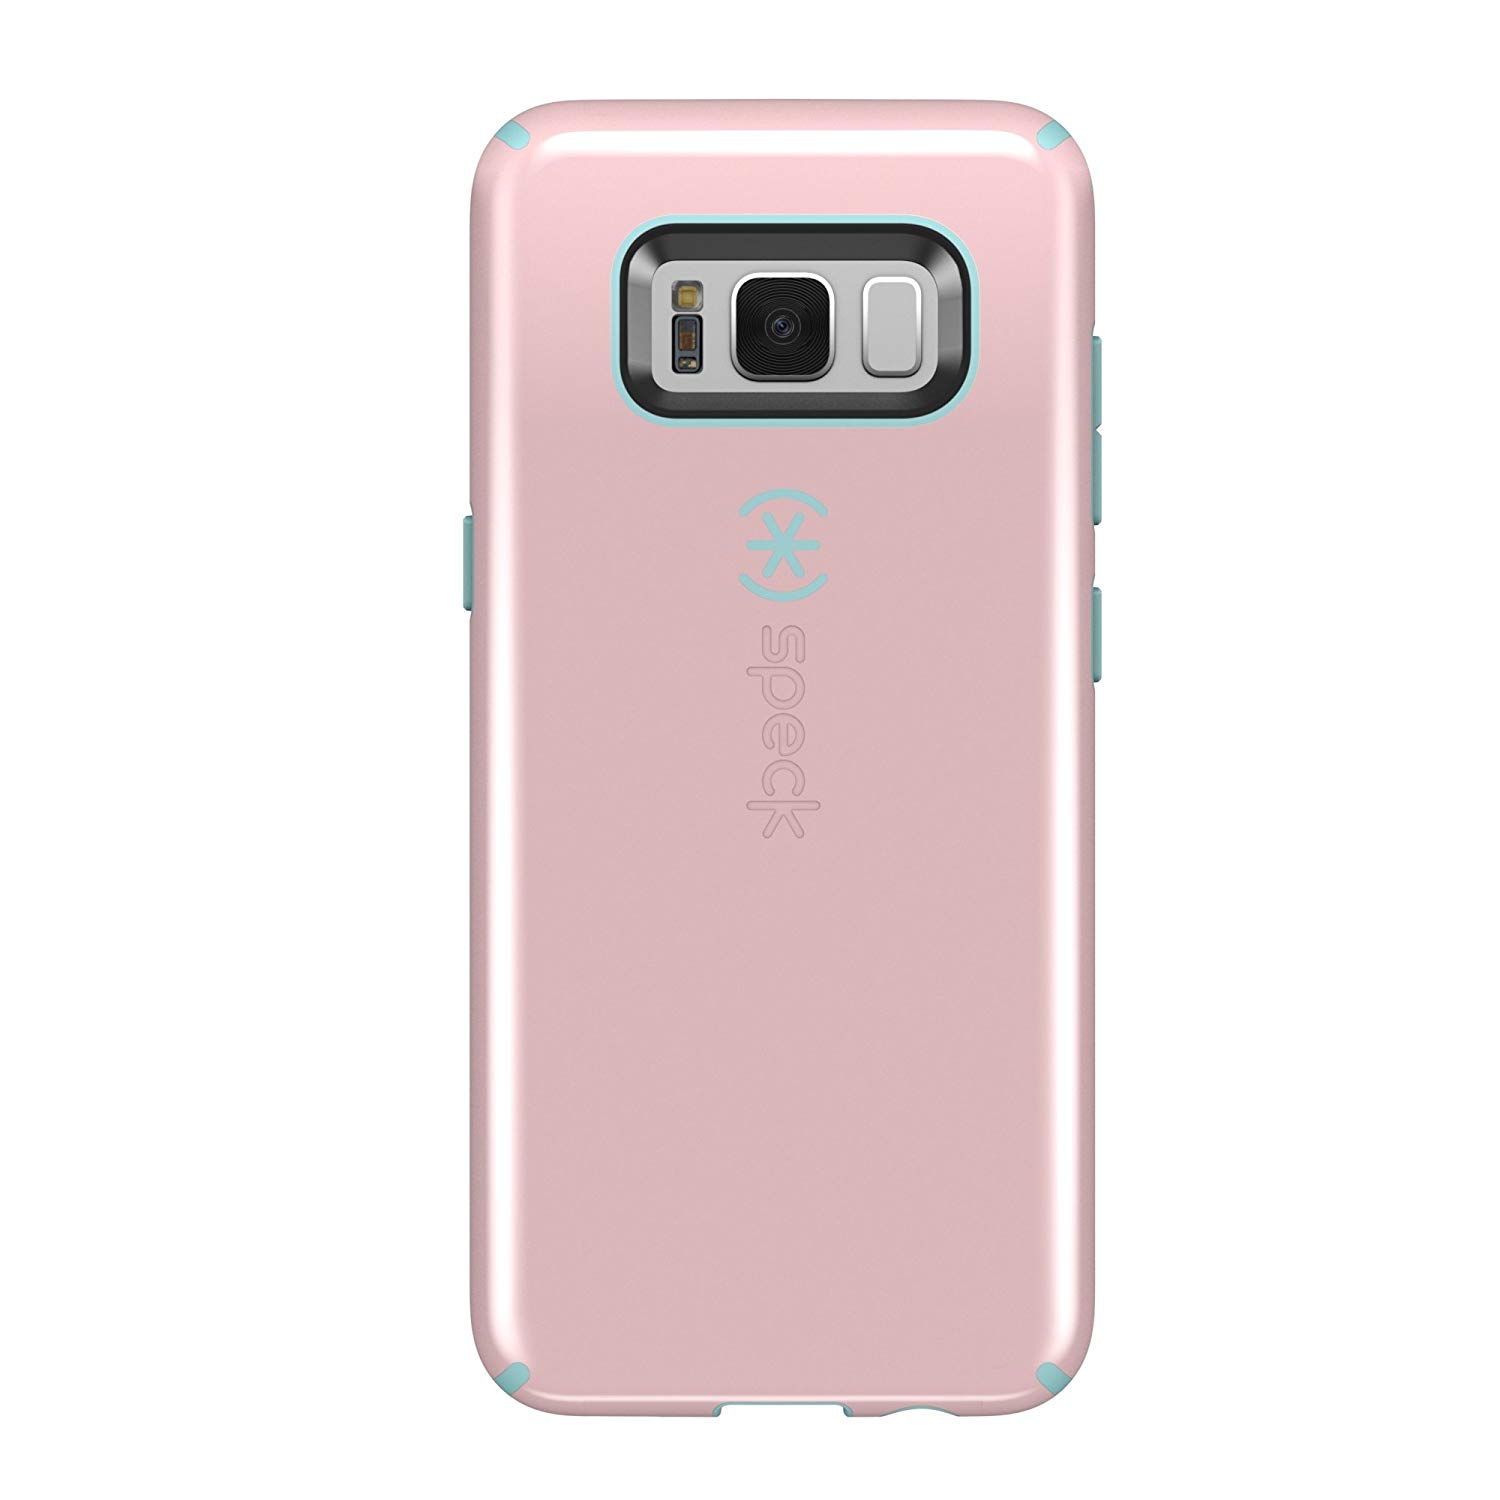 Speck Fitted Hard Shell Case for Samsung Galaxy S8 Plus - Pink;River Blue